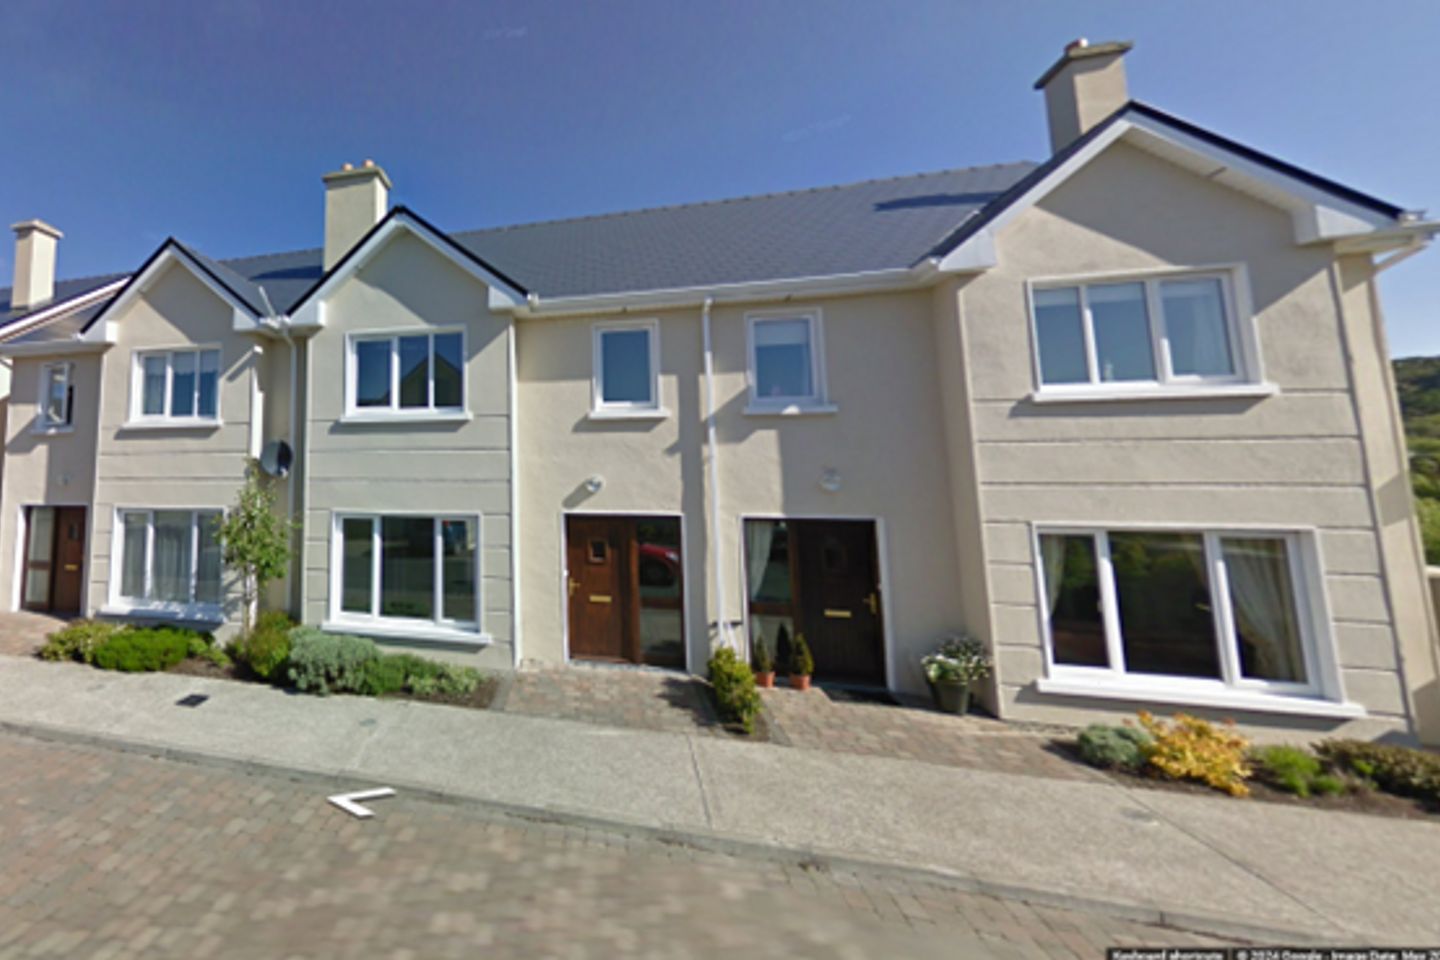 25 Cúirt Cregg, Galway Road, Clifden, Co. Galway, H71PE83